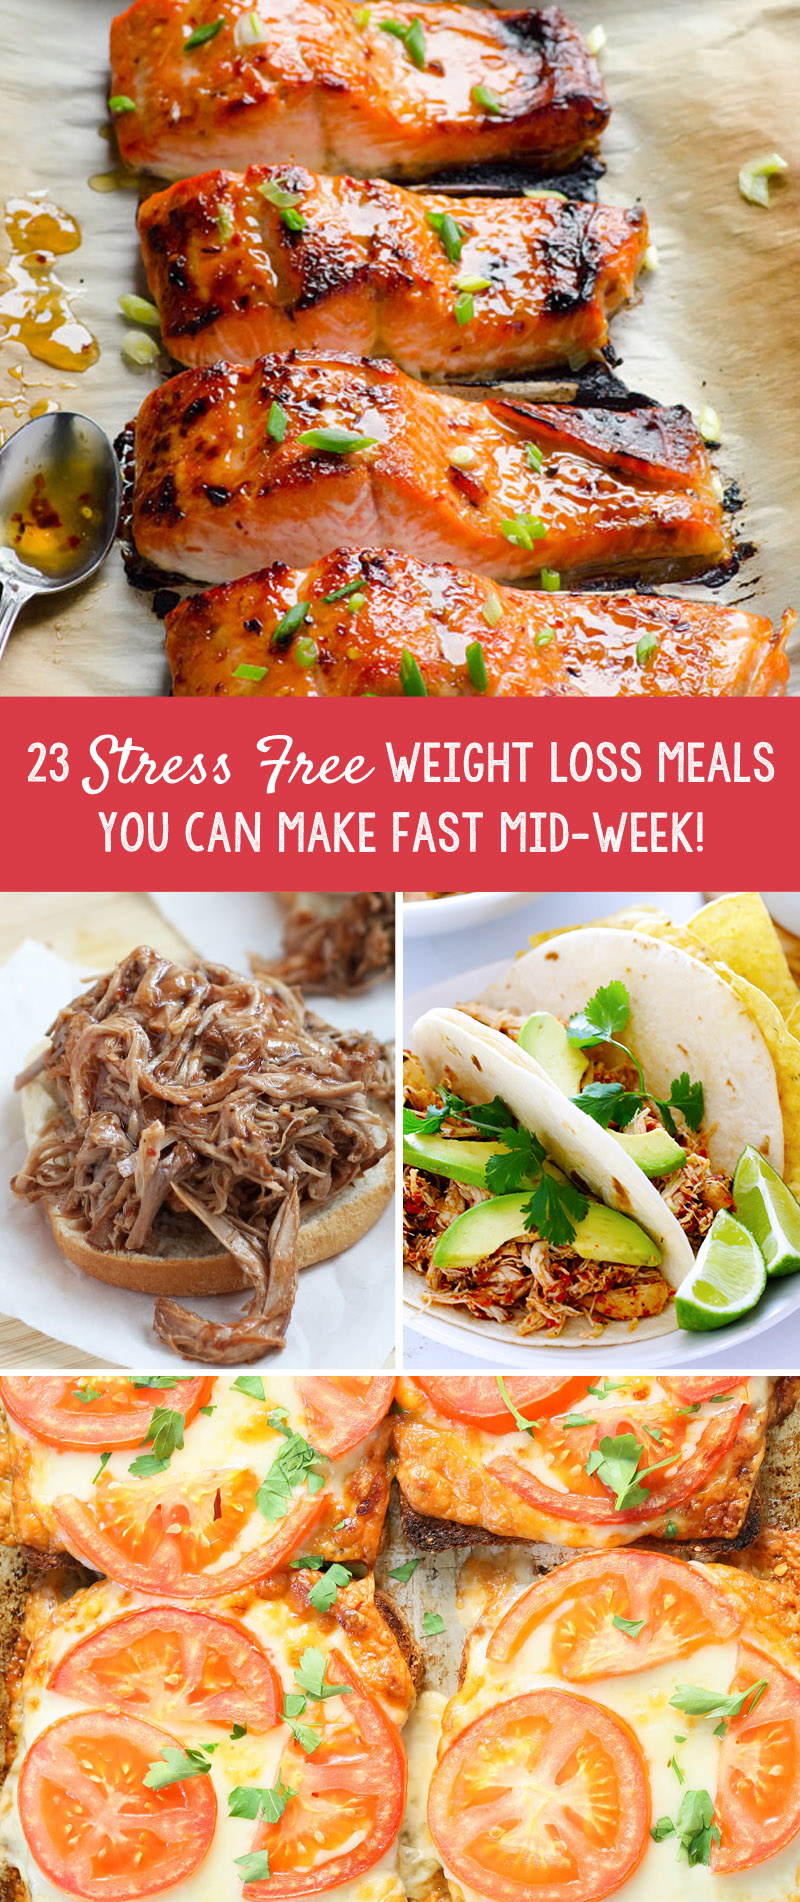 23 Stress Free Weight Loss Meals You Can Make Fast Mid-Week!